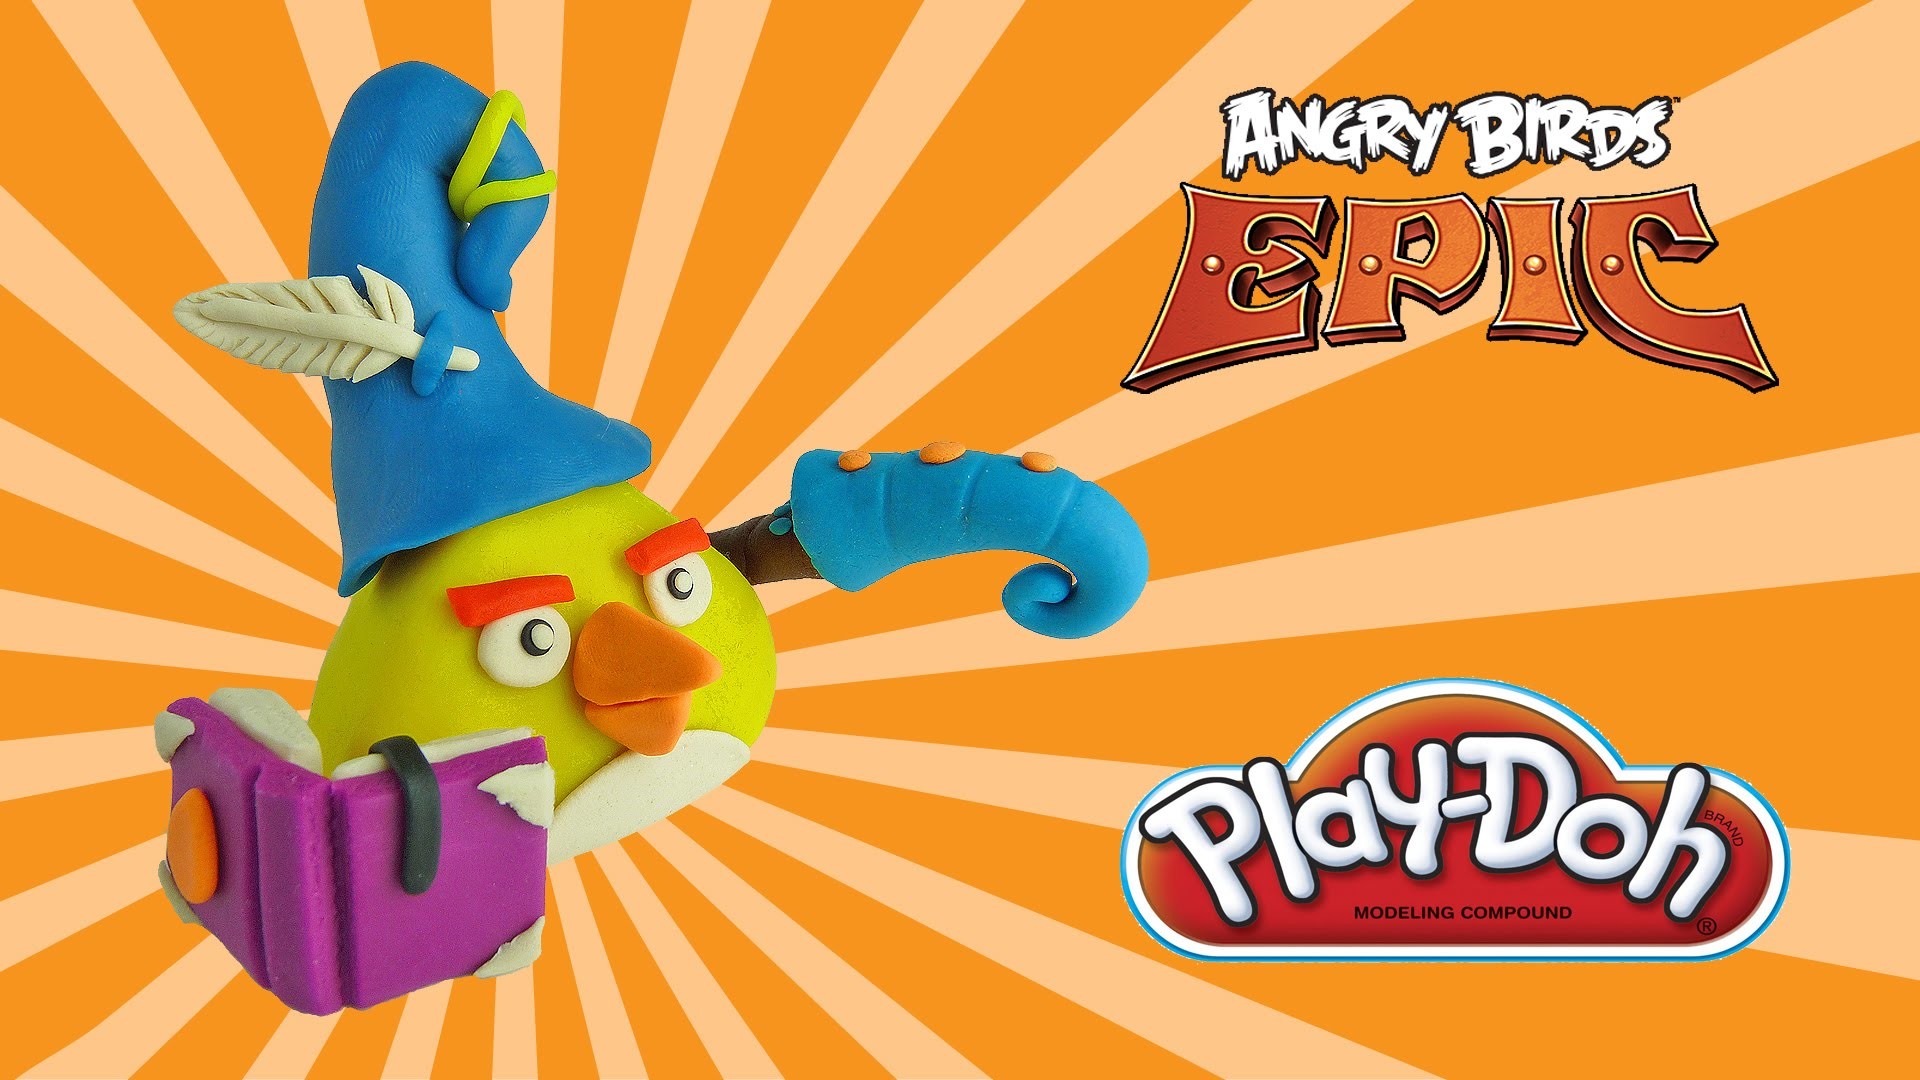 Play doh angry birds epic chuck yellow bird - how to make with playdoh